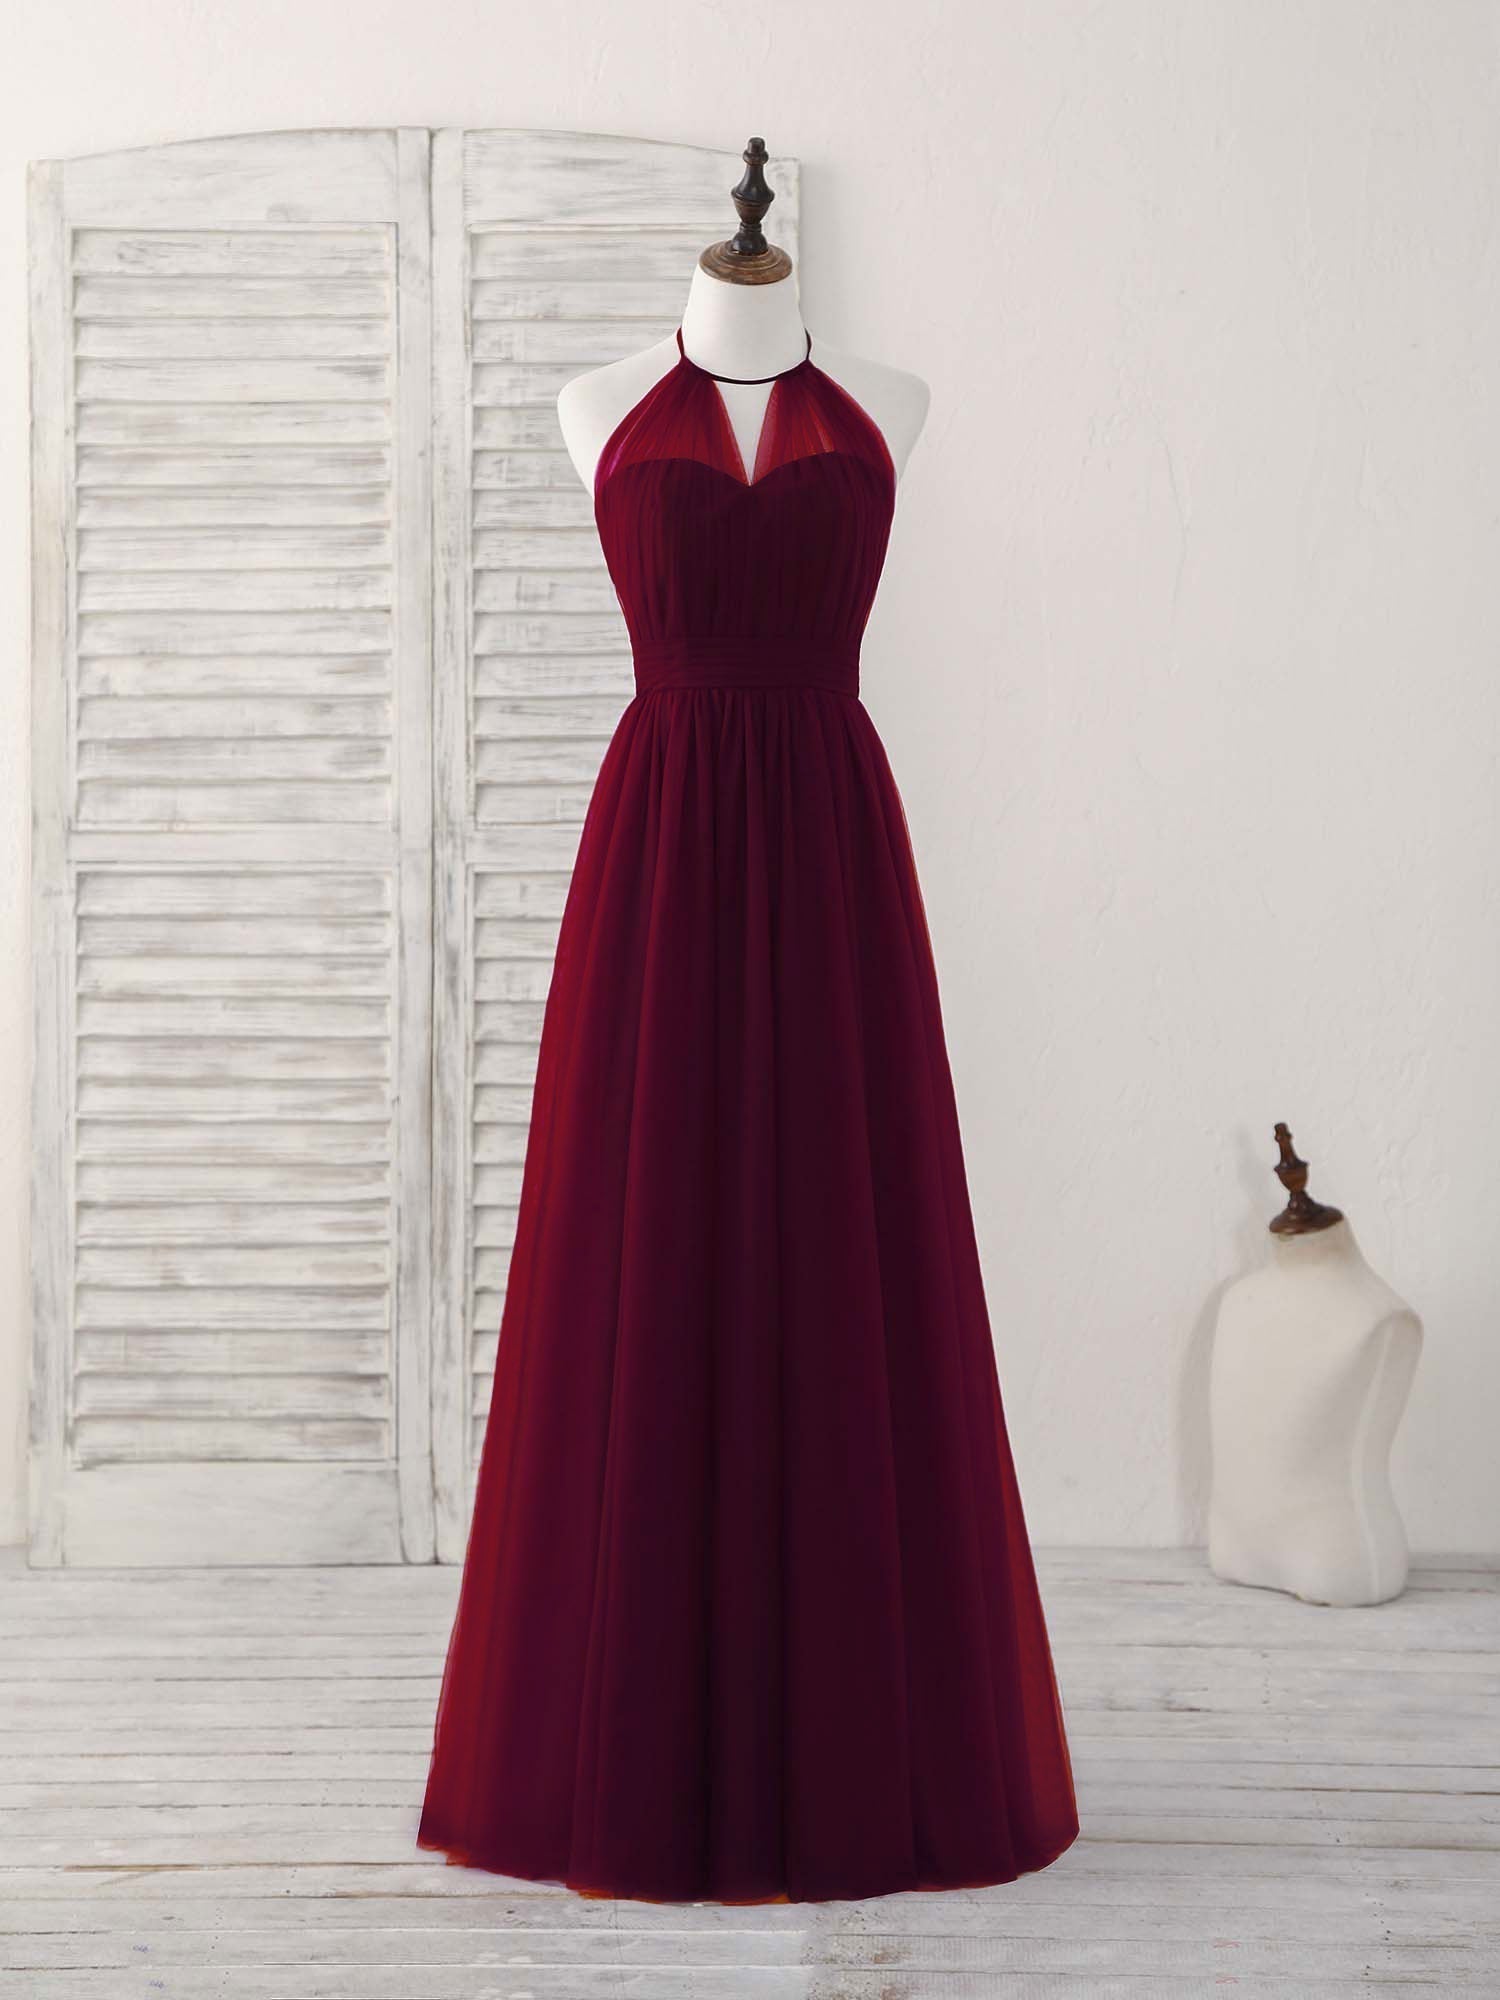 Bridesmaid Dresses Different Styles, Simple Burgundy Tulle Long Prom Dress, Burgundy Bridesmaid Dress